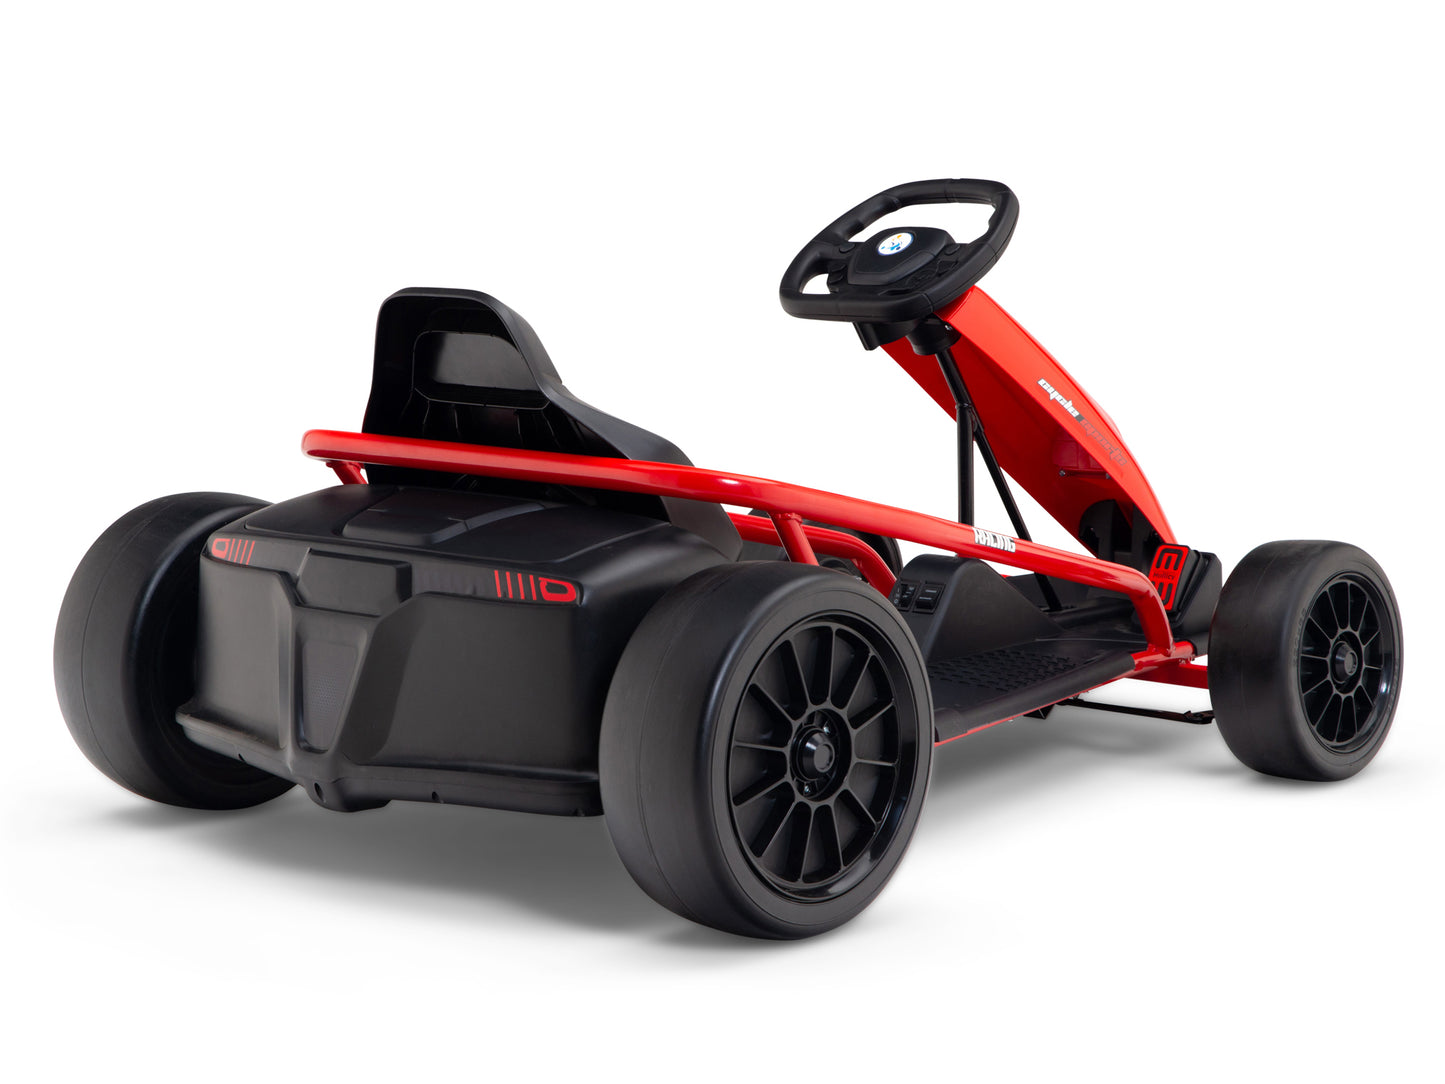 RIDINGTON 24V Kids Electric Go-Kart with DRIFT Function - Red